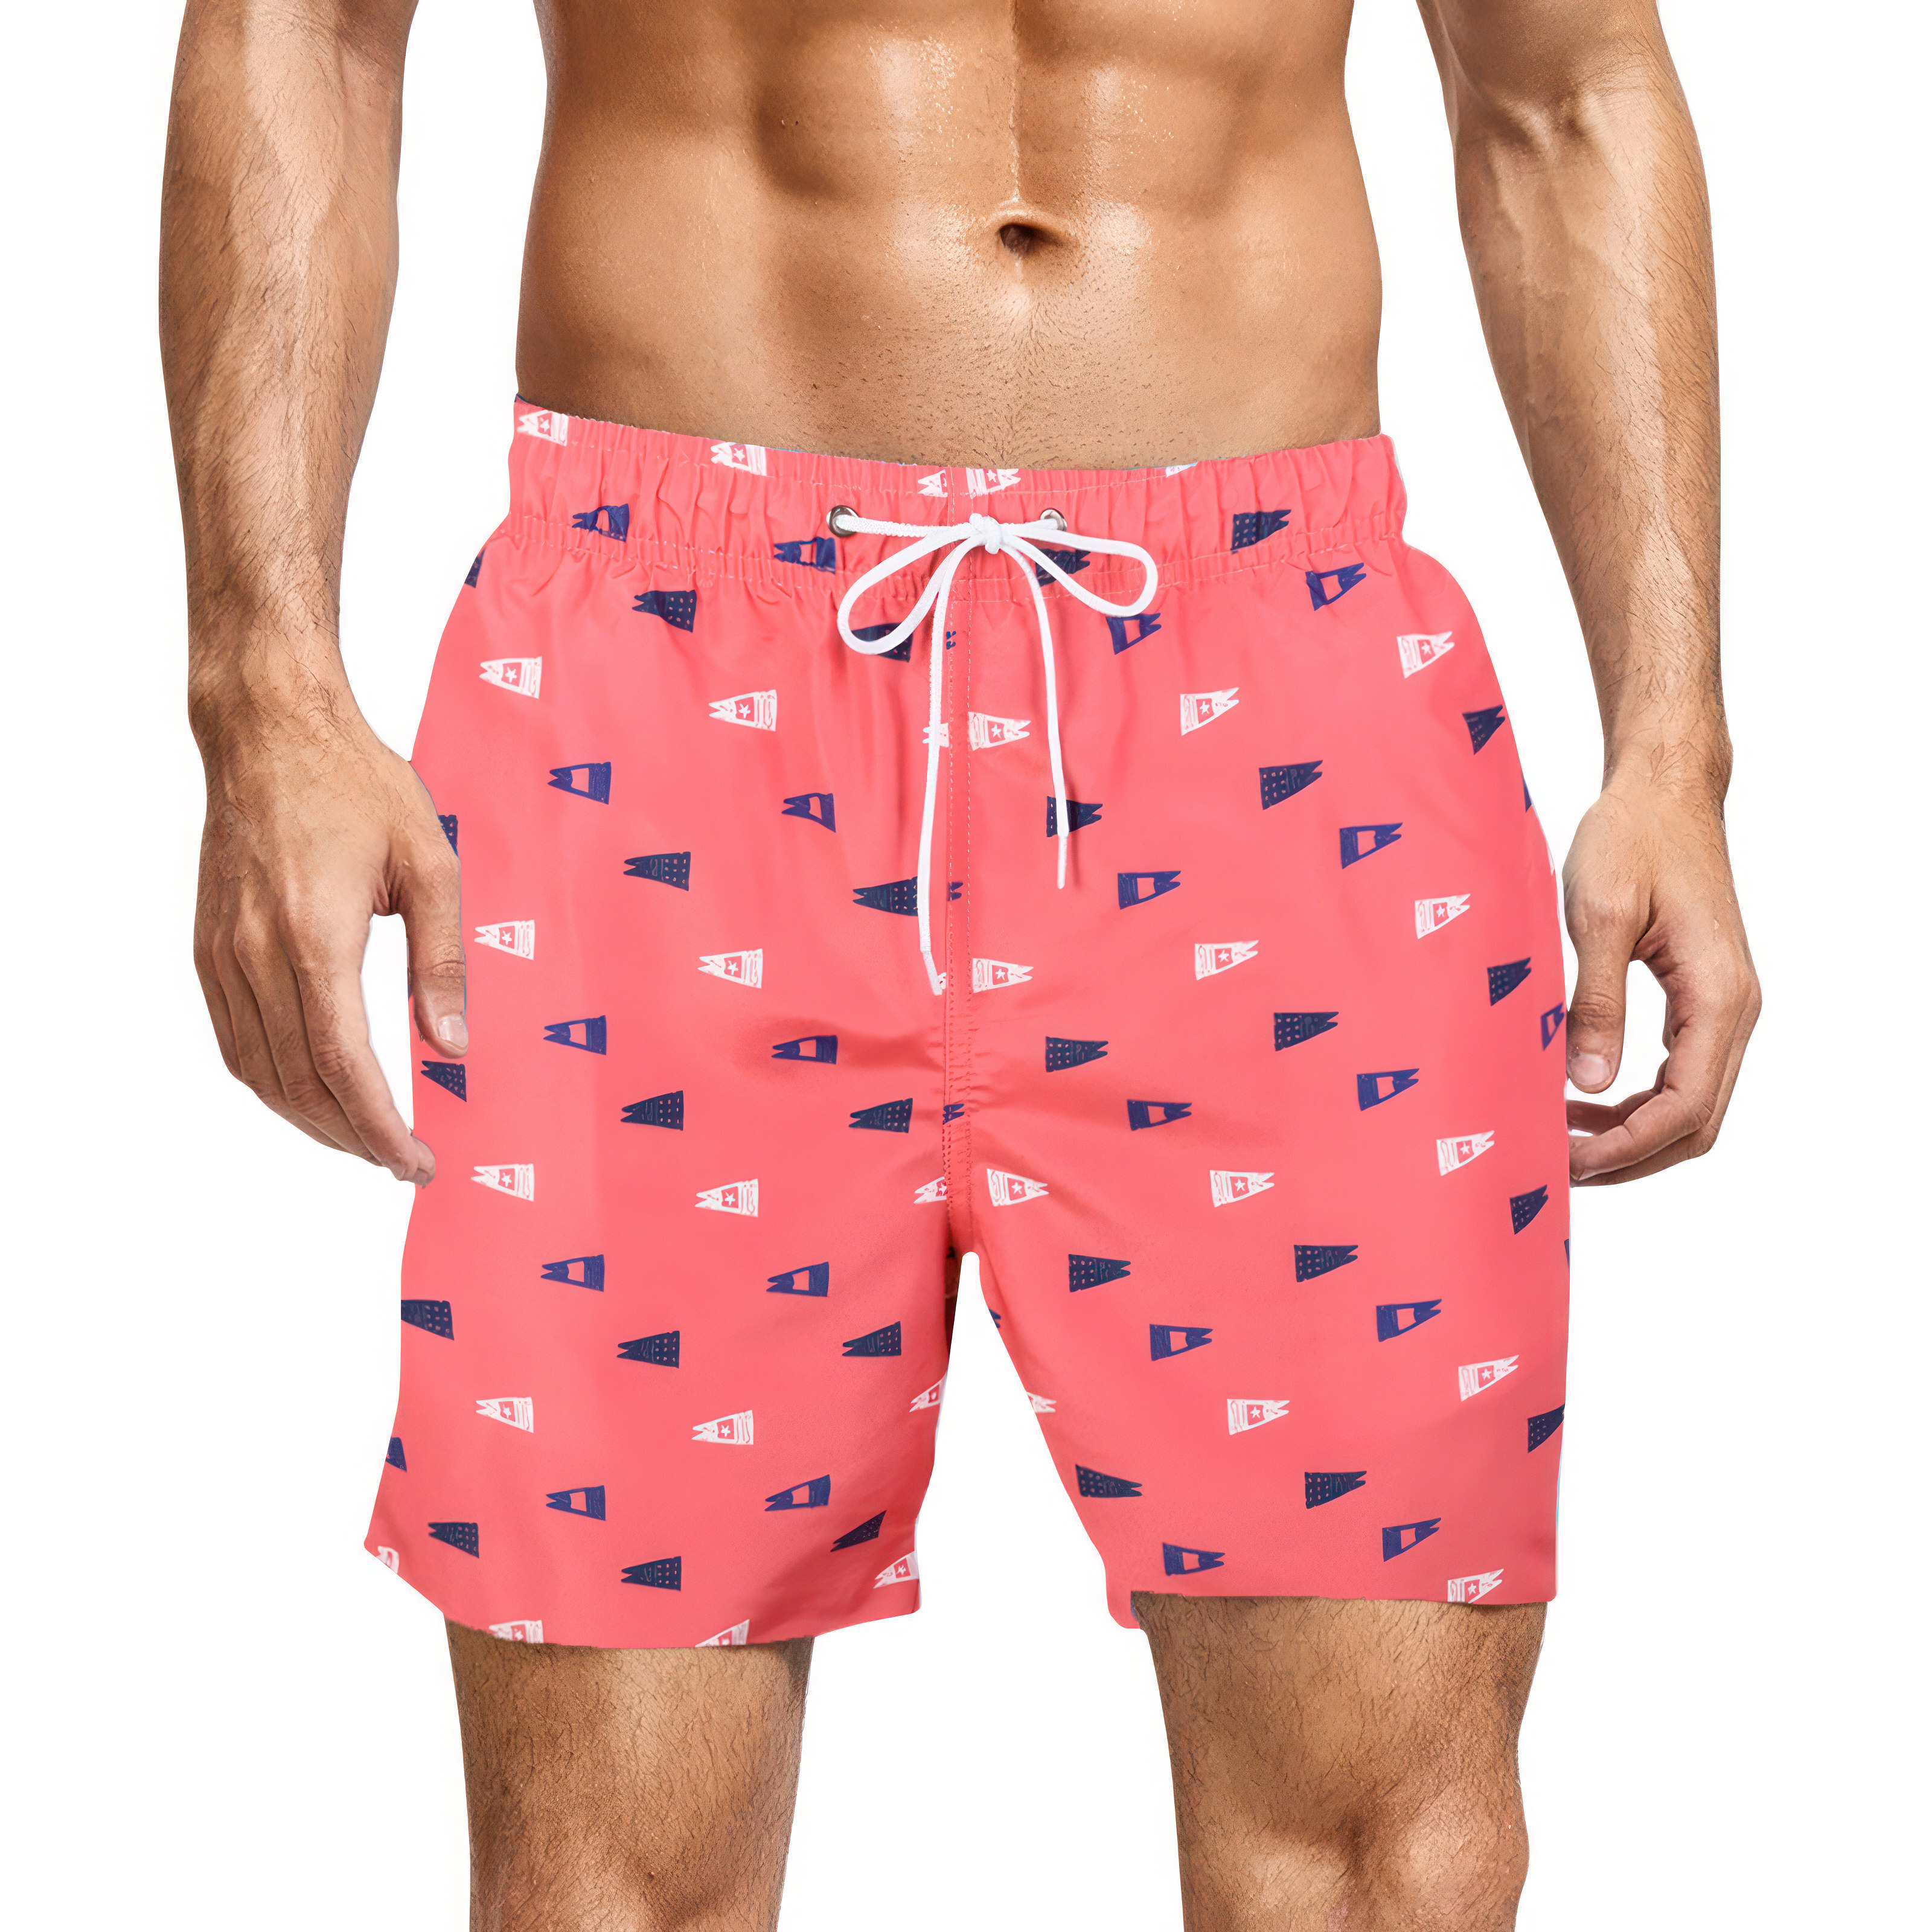 3-Pack Men's Printed Swim Shorts With Pockets Quick Dry Beachwear Bathing Suits Board Trunks - S